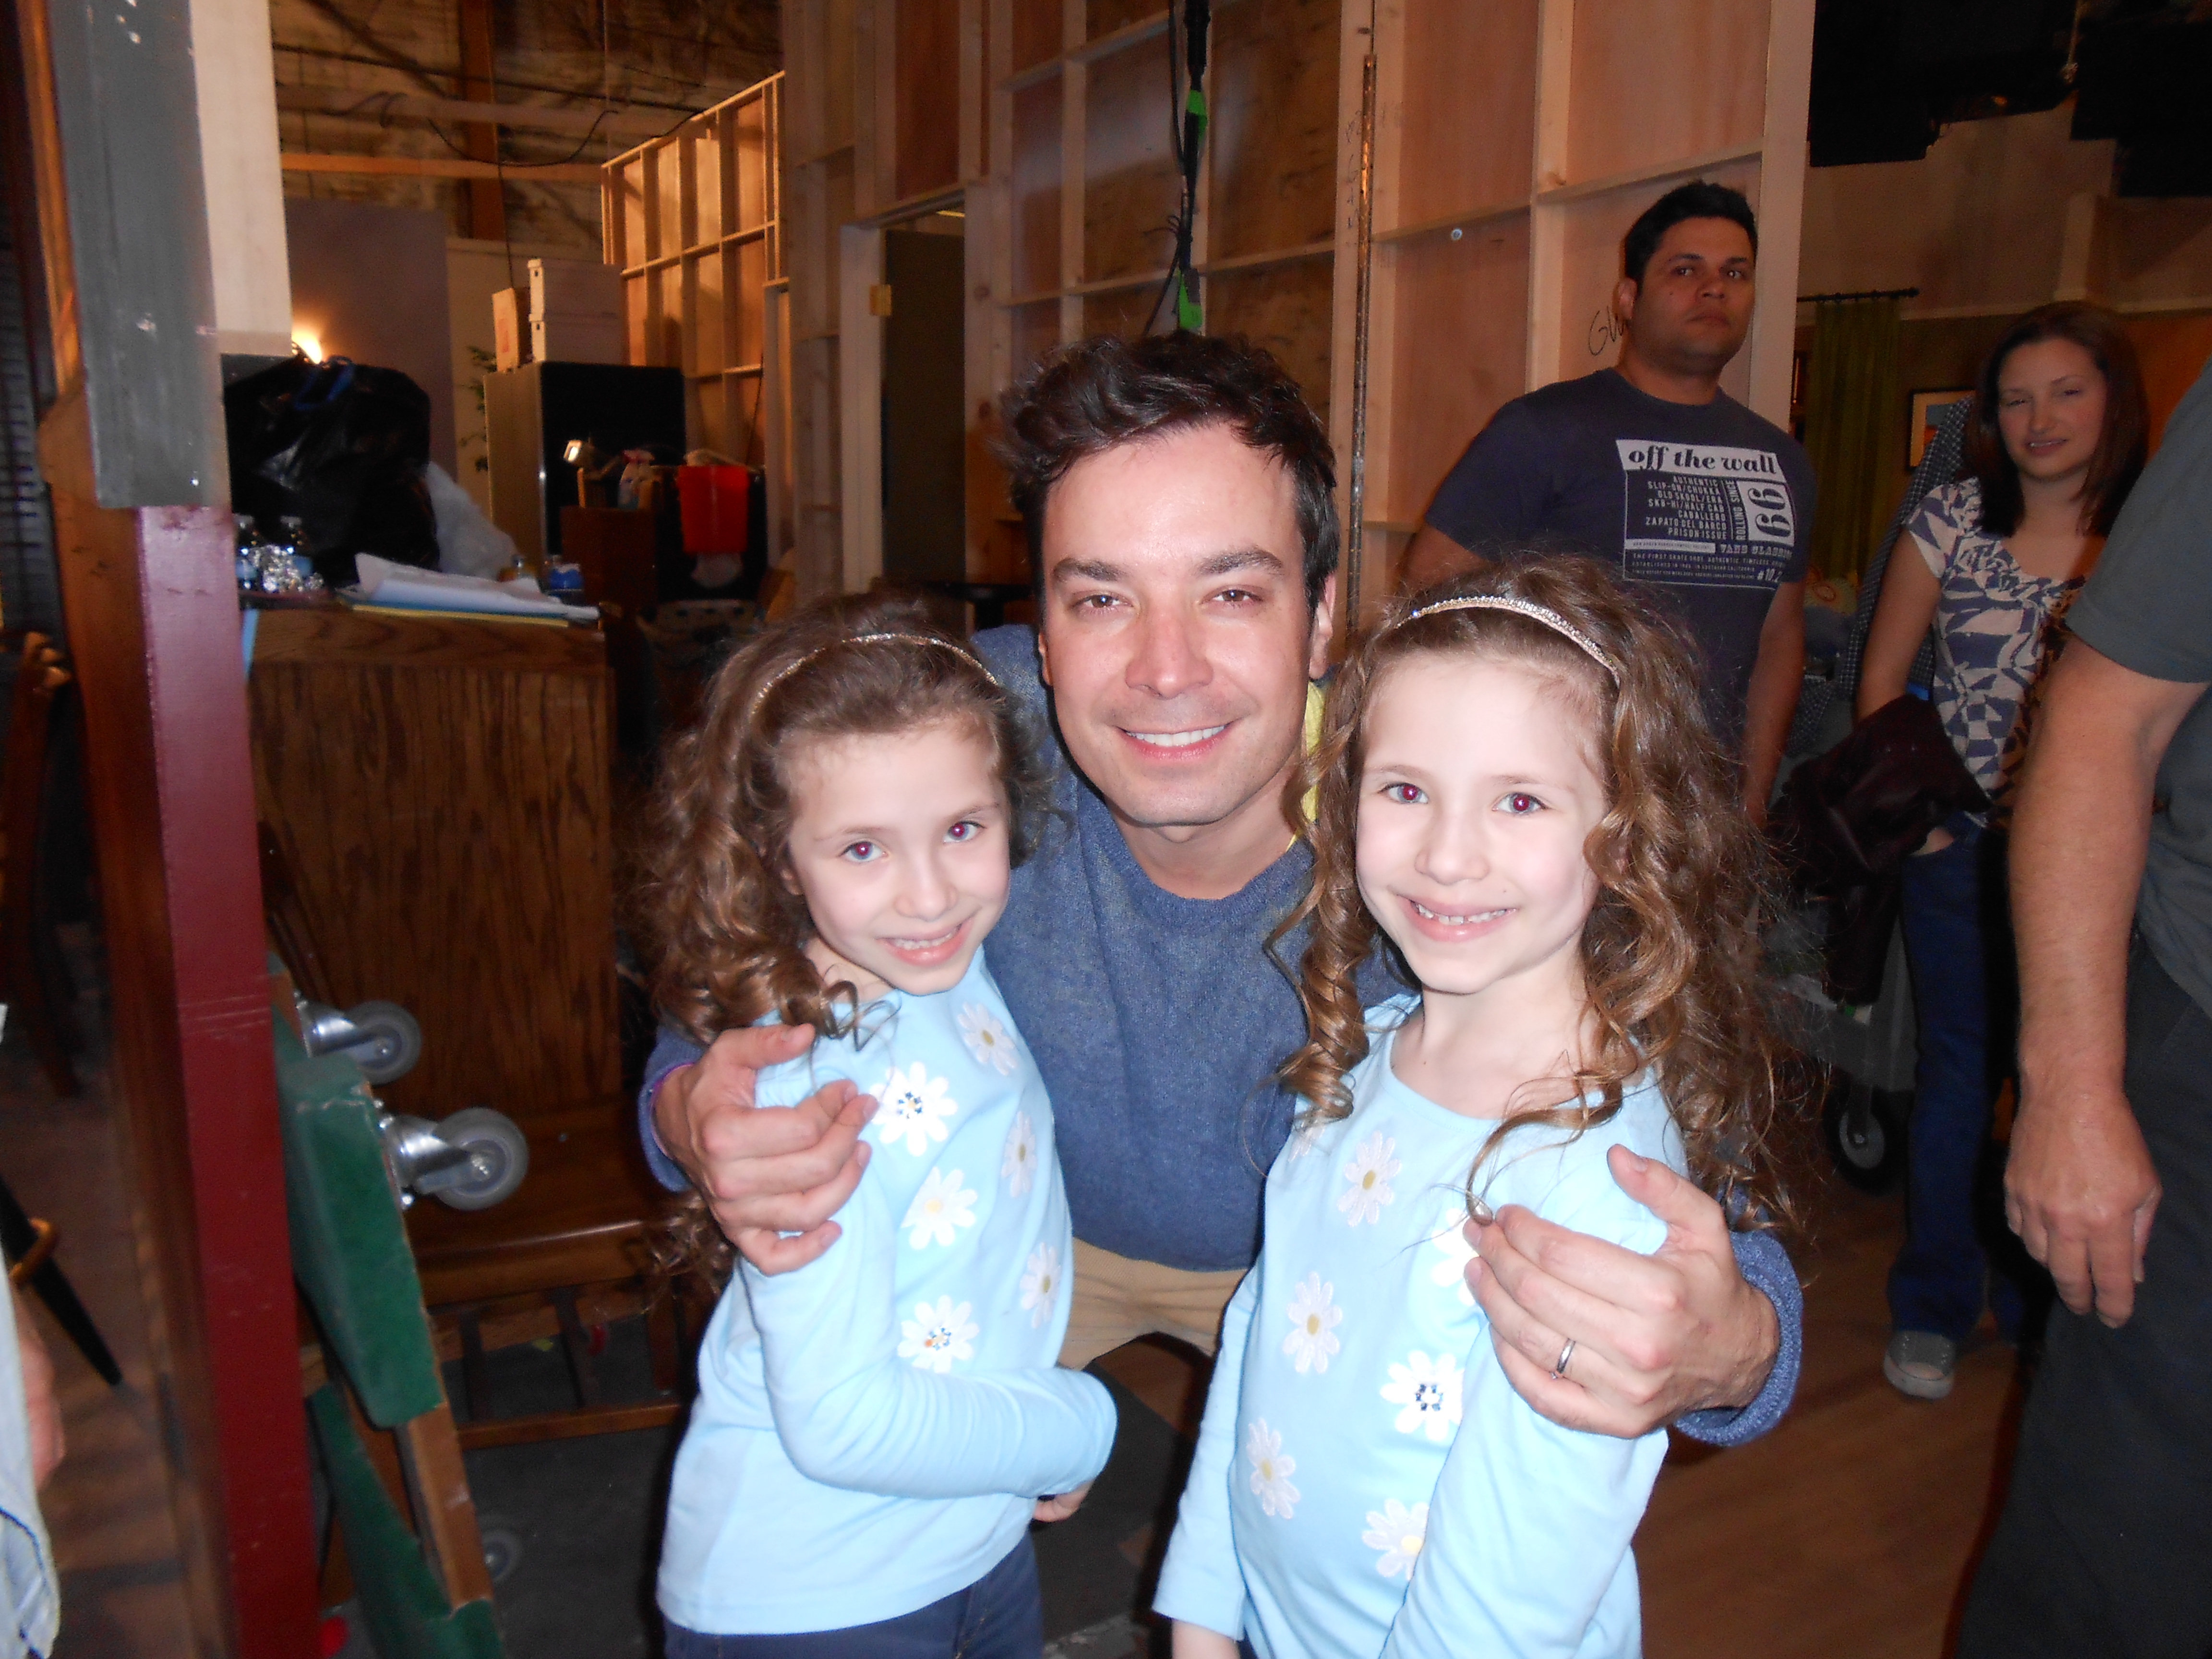 Bianca and Chiara D'ambrosio with Jimmy Fallon on set of Guys with Kids Pilot. April 2012